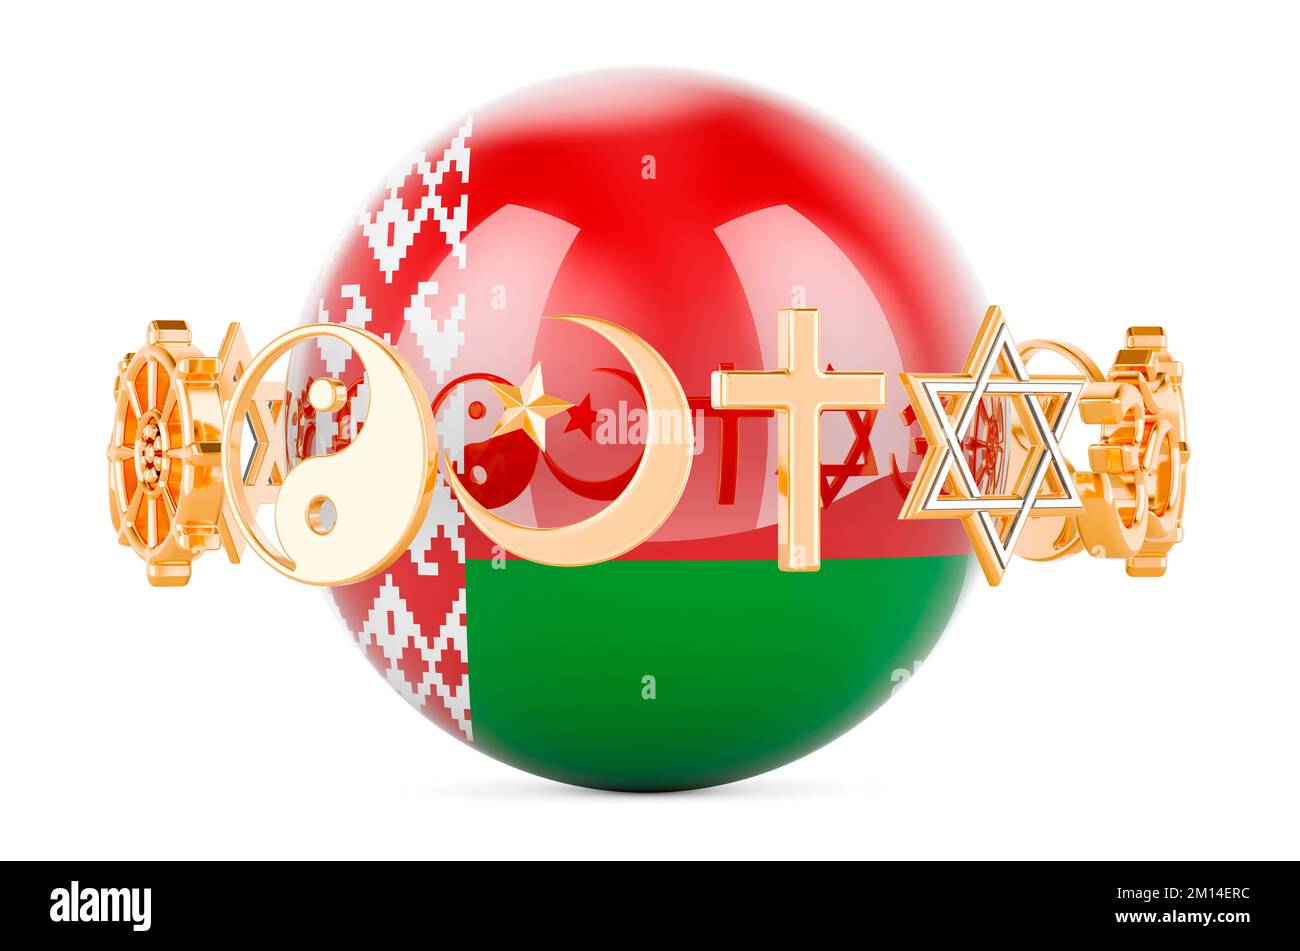 Belarusian flag painted on sphere with religions symbols around, 3D rendering isolated on white background Stock Photo